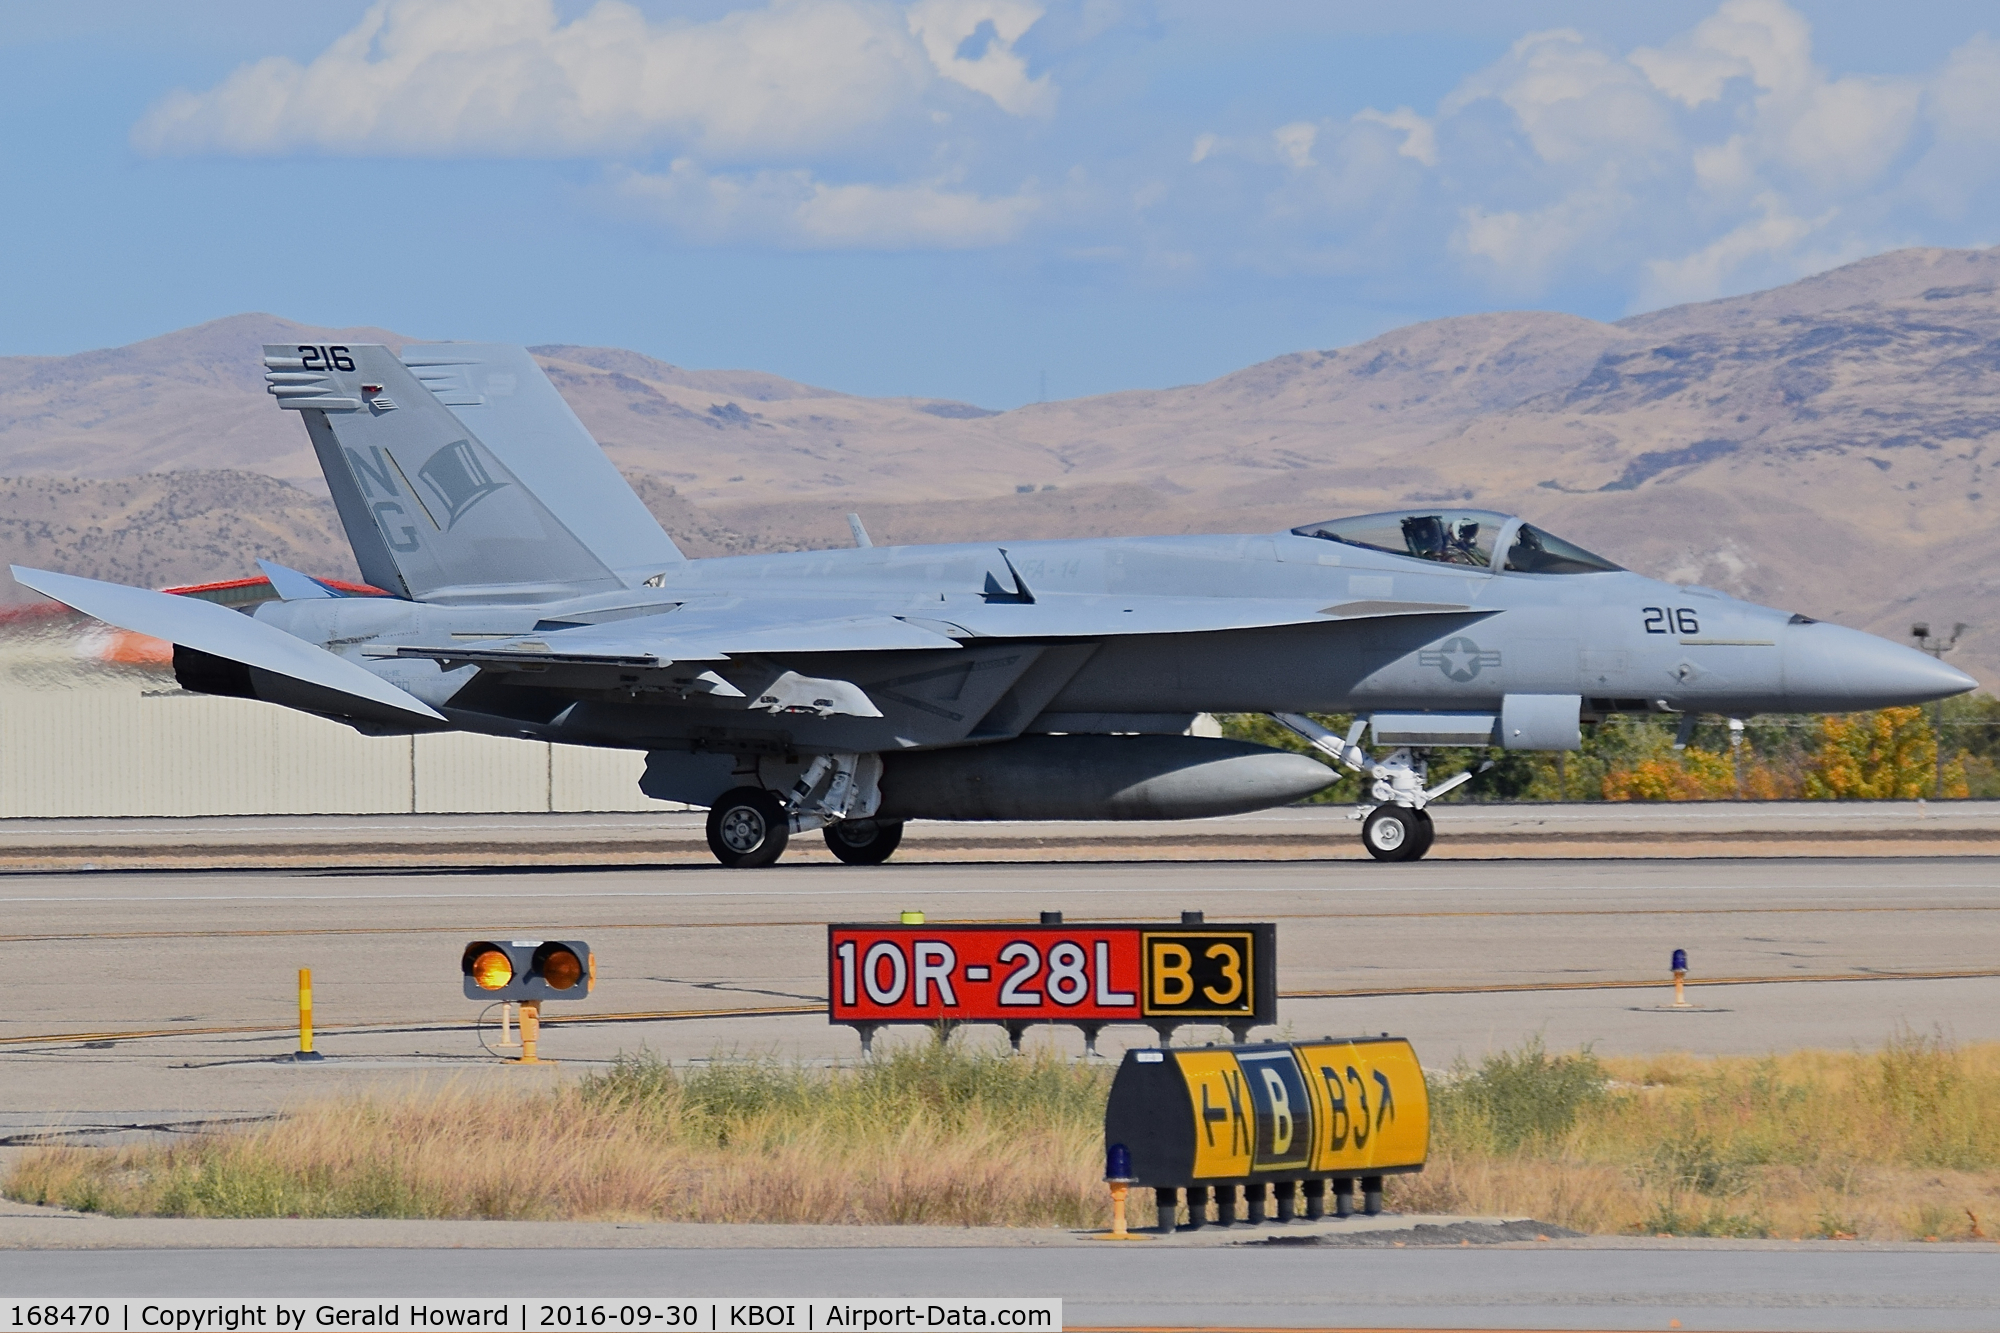 168470, Boeing F/A-18E Super Hornet C/N E-227, Take off roll on RWY 10R.  VFA-14 “Tophatters”,
Carrier Air Wing 9, NAS Lemoore, CA